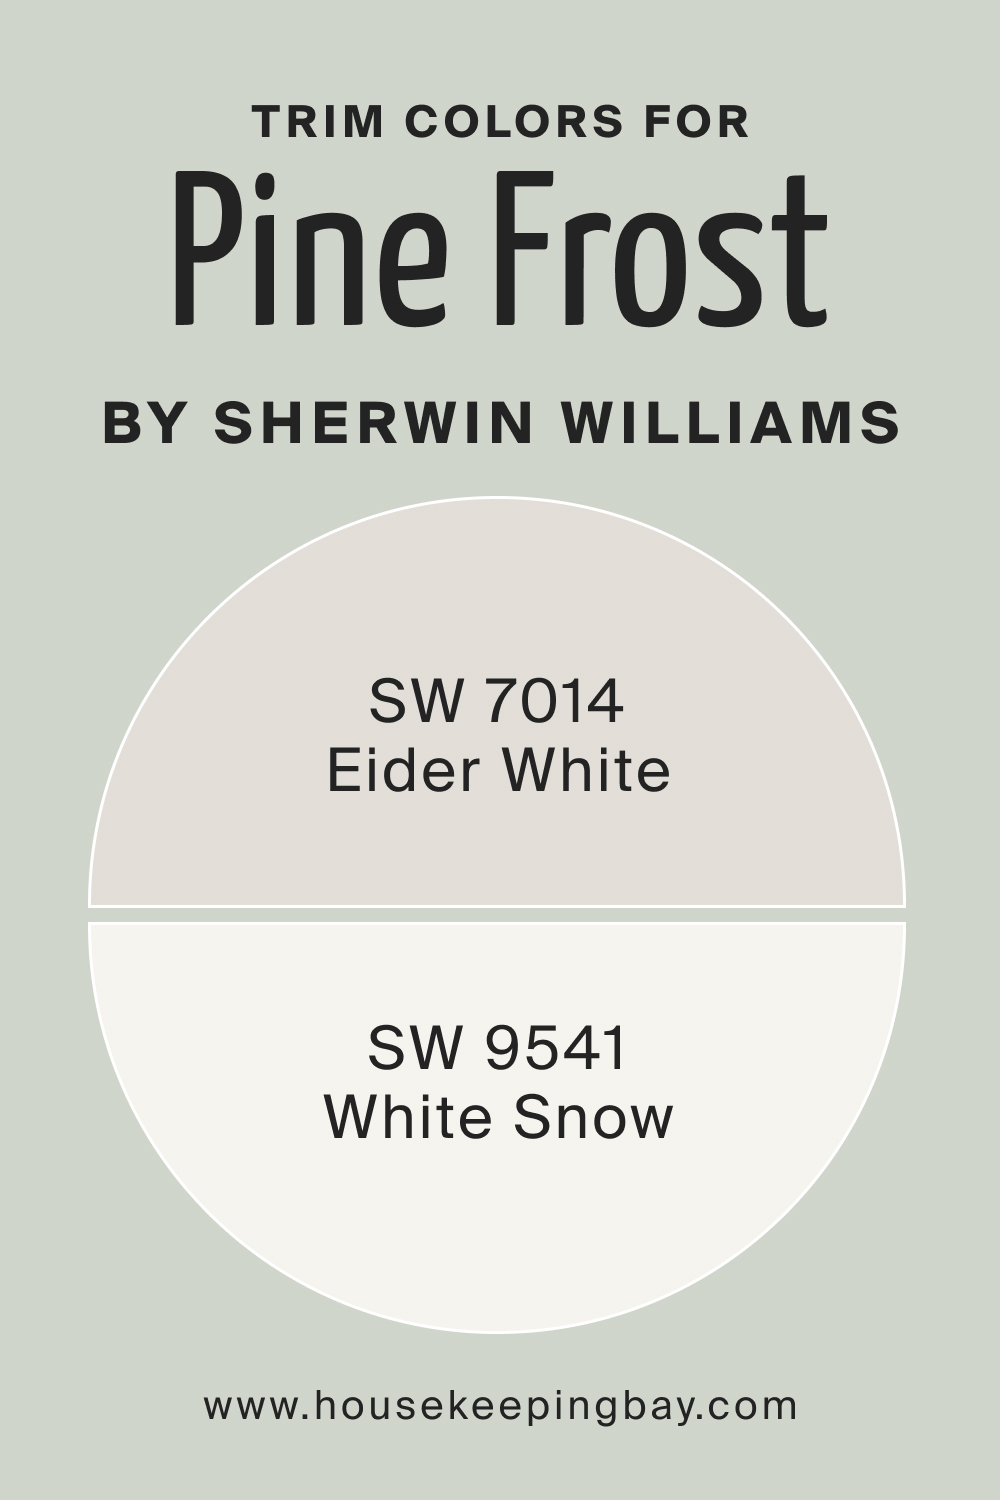 Trim Colors of SW 9656 Pine Frost by Sherwin Williams